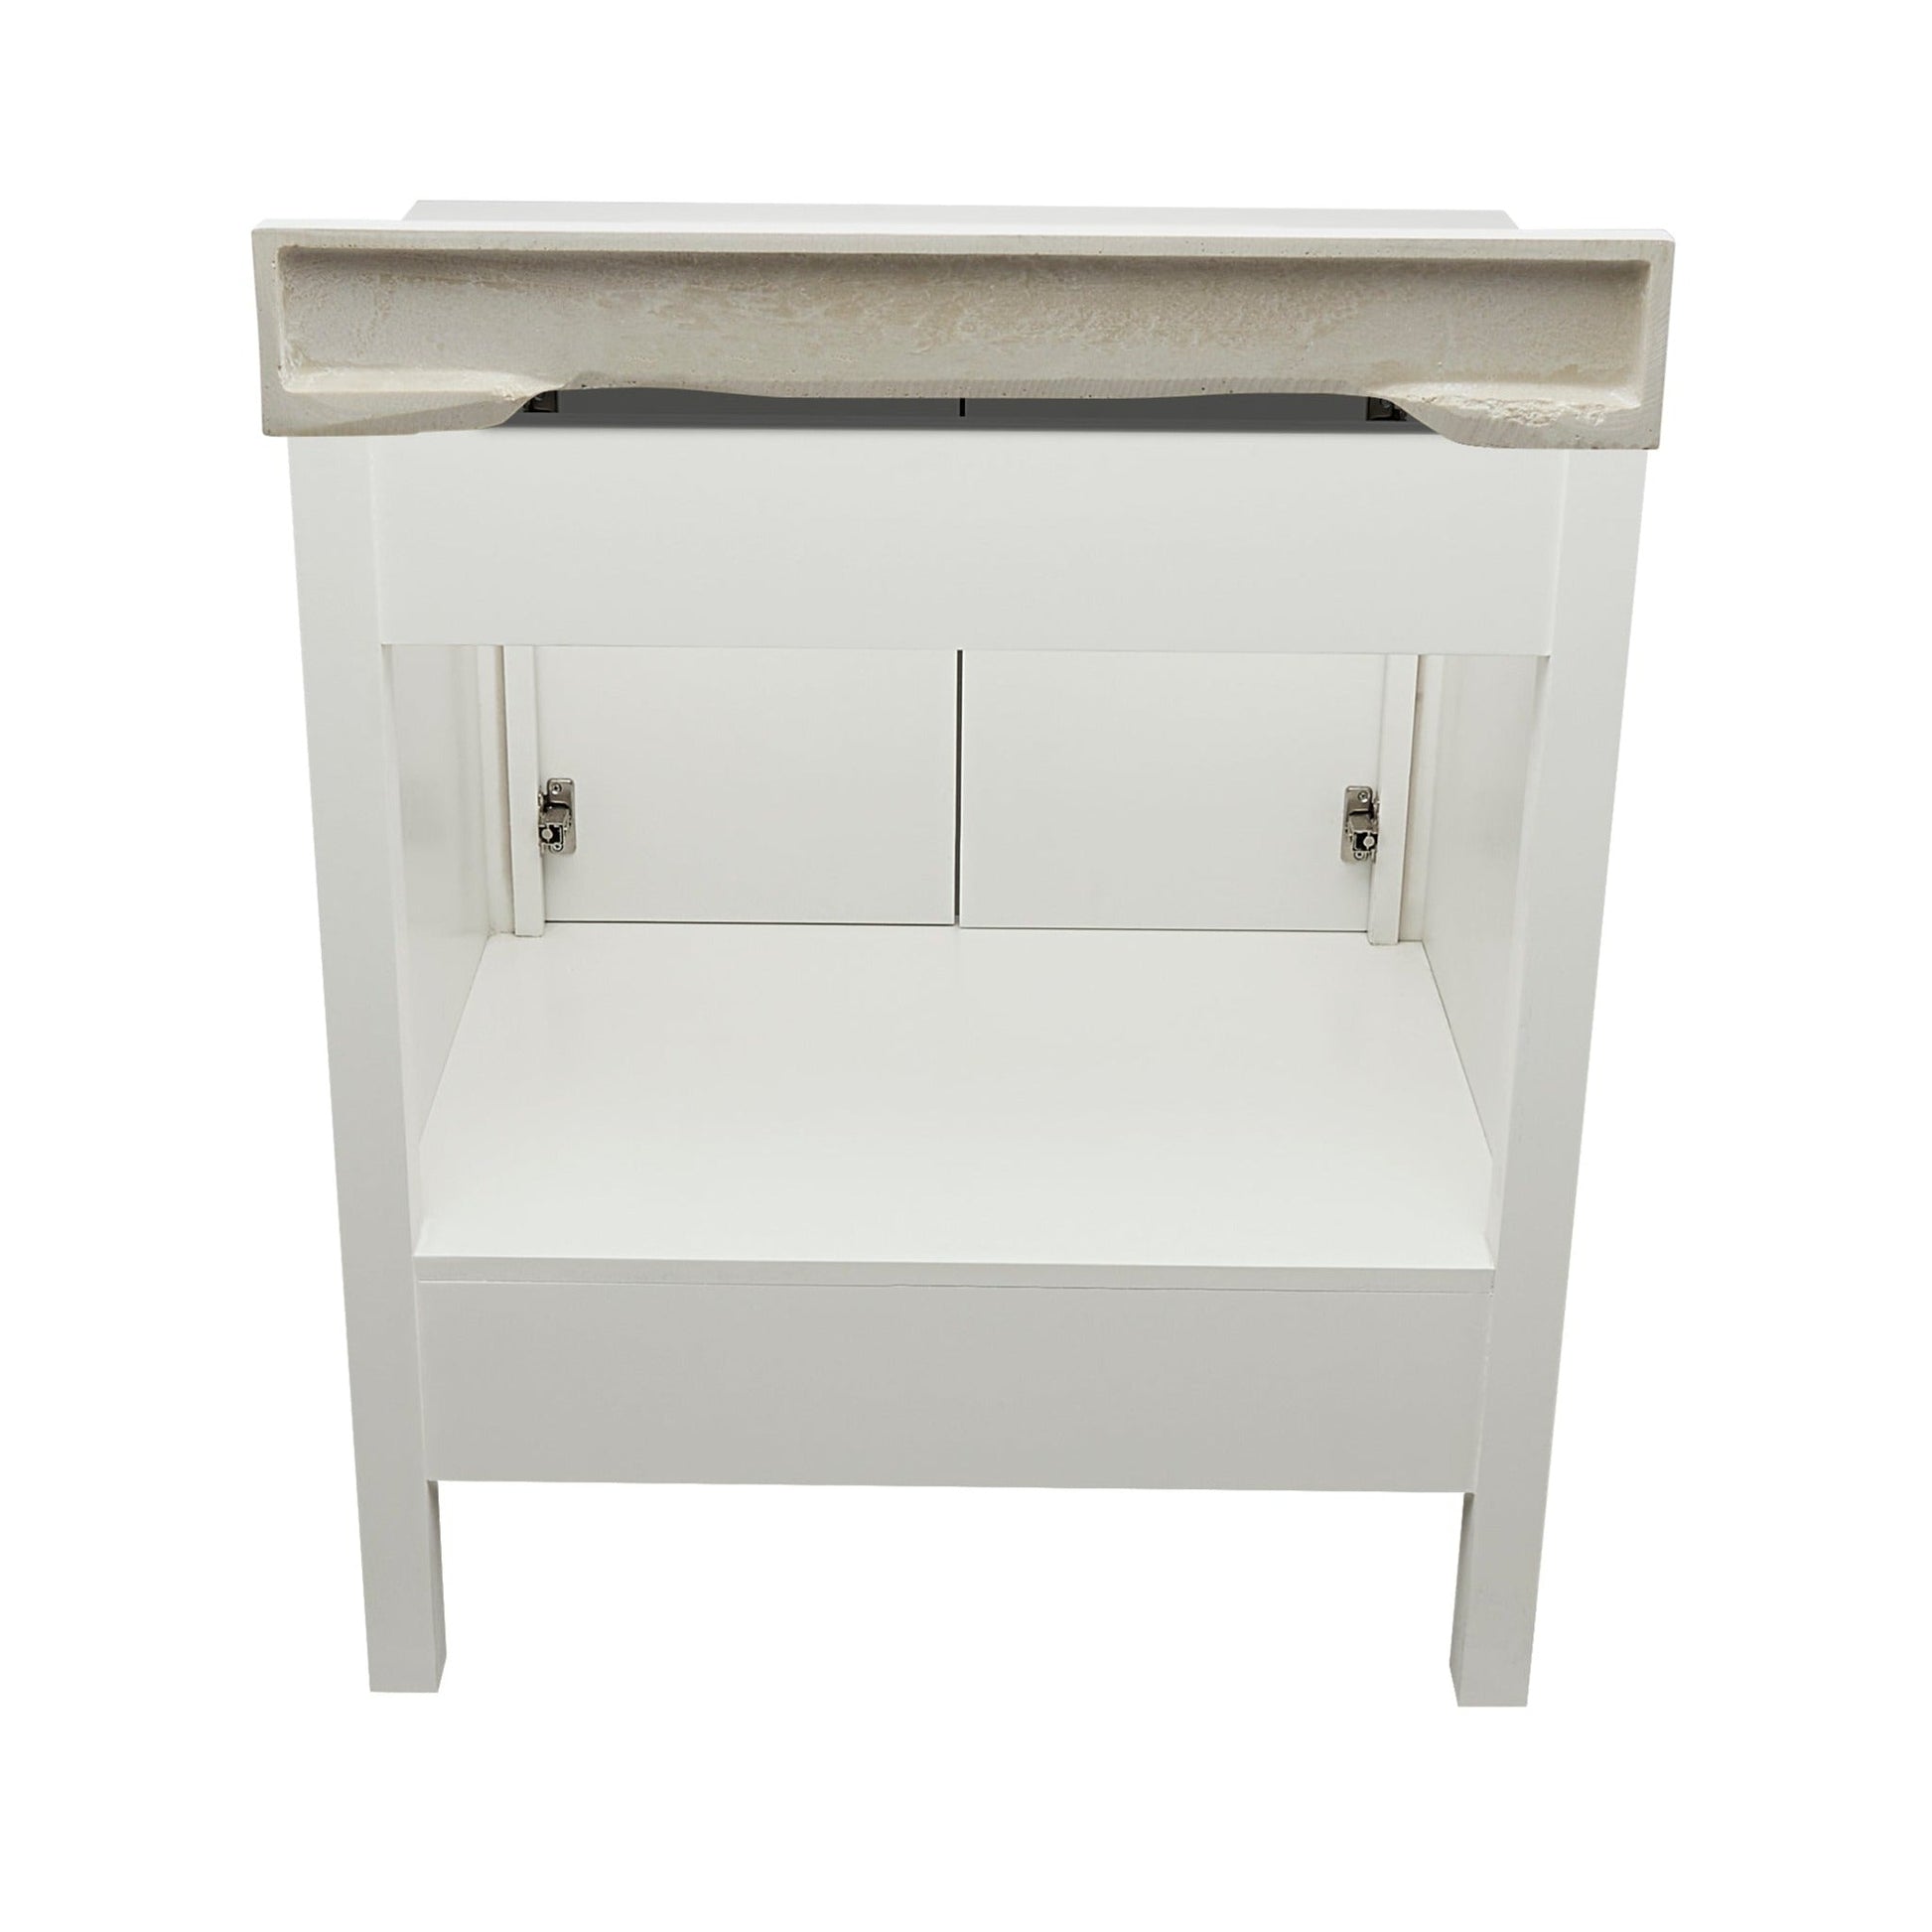 Ella’s Bubbles Nevado 31" White Bathroom Vanity With White Cultured Marble Top With White Backsplash and Sink